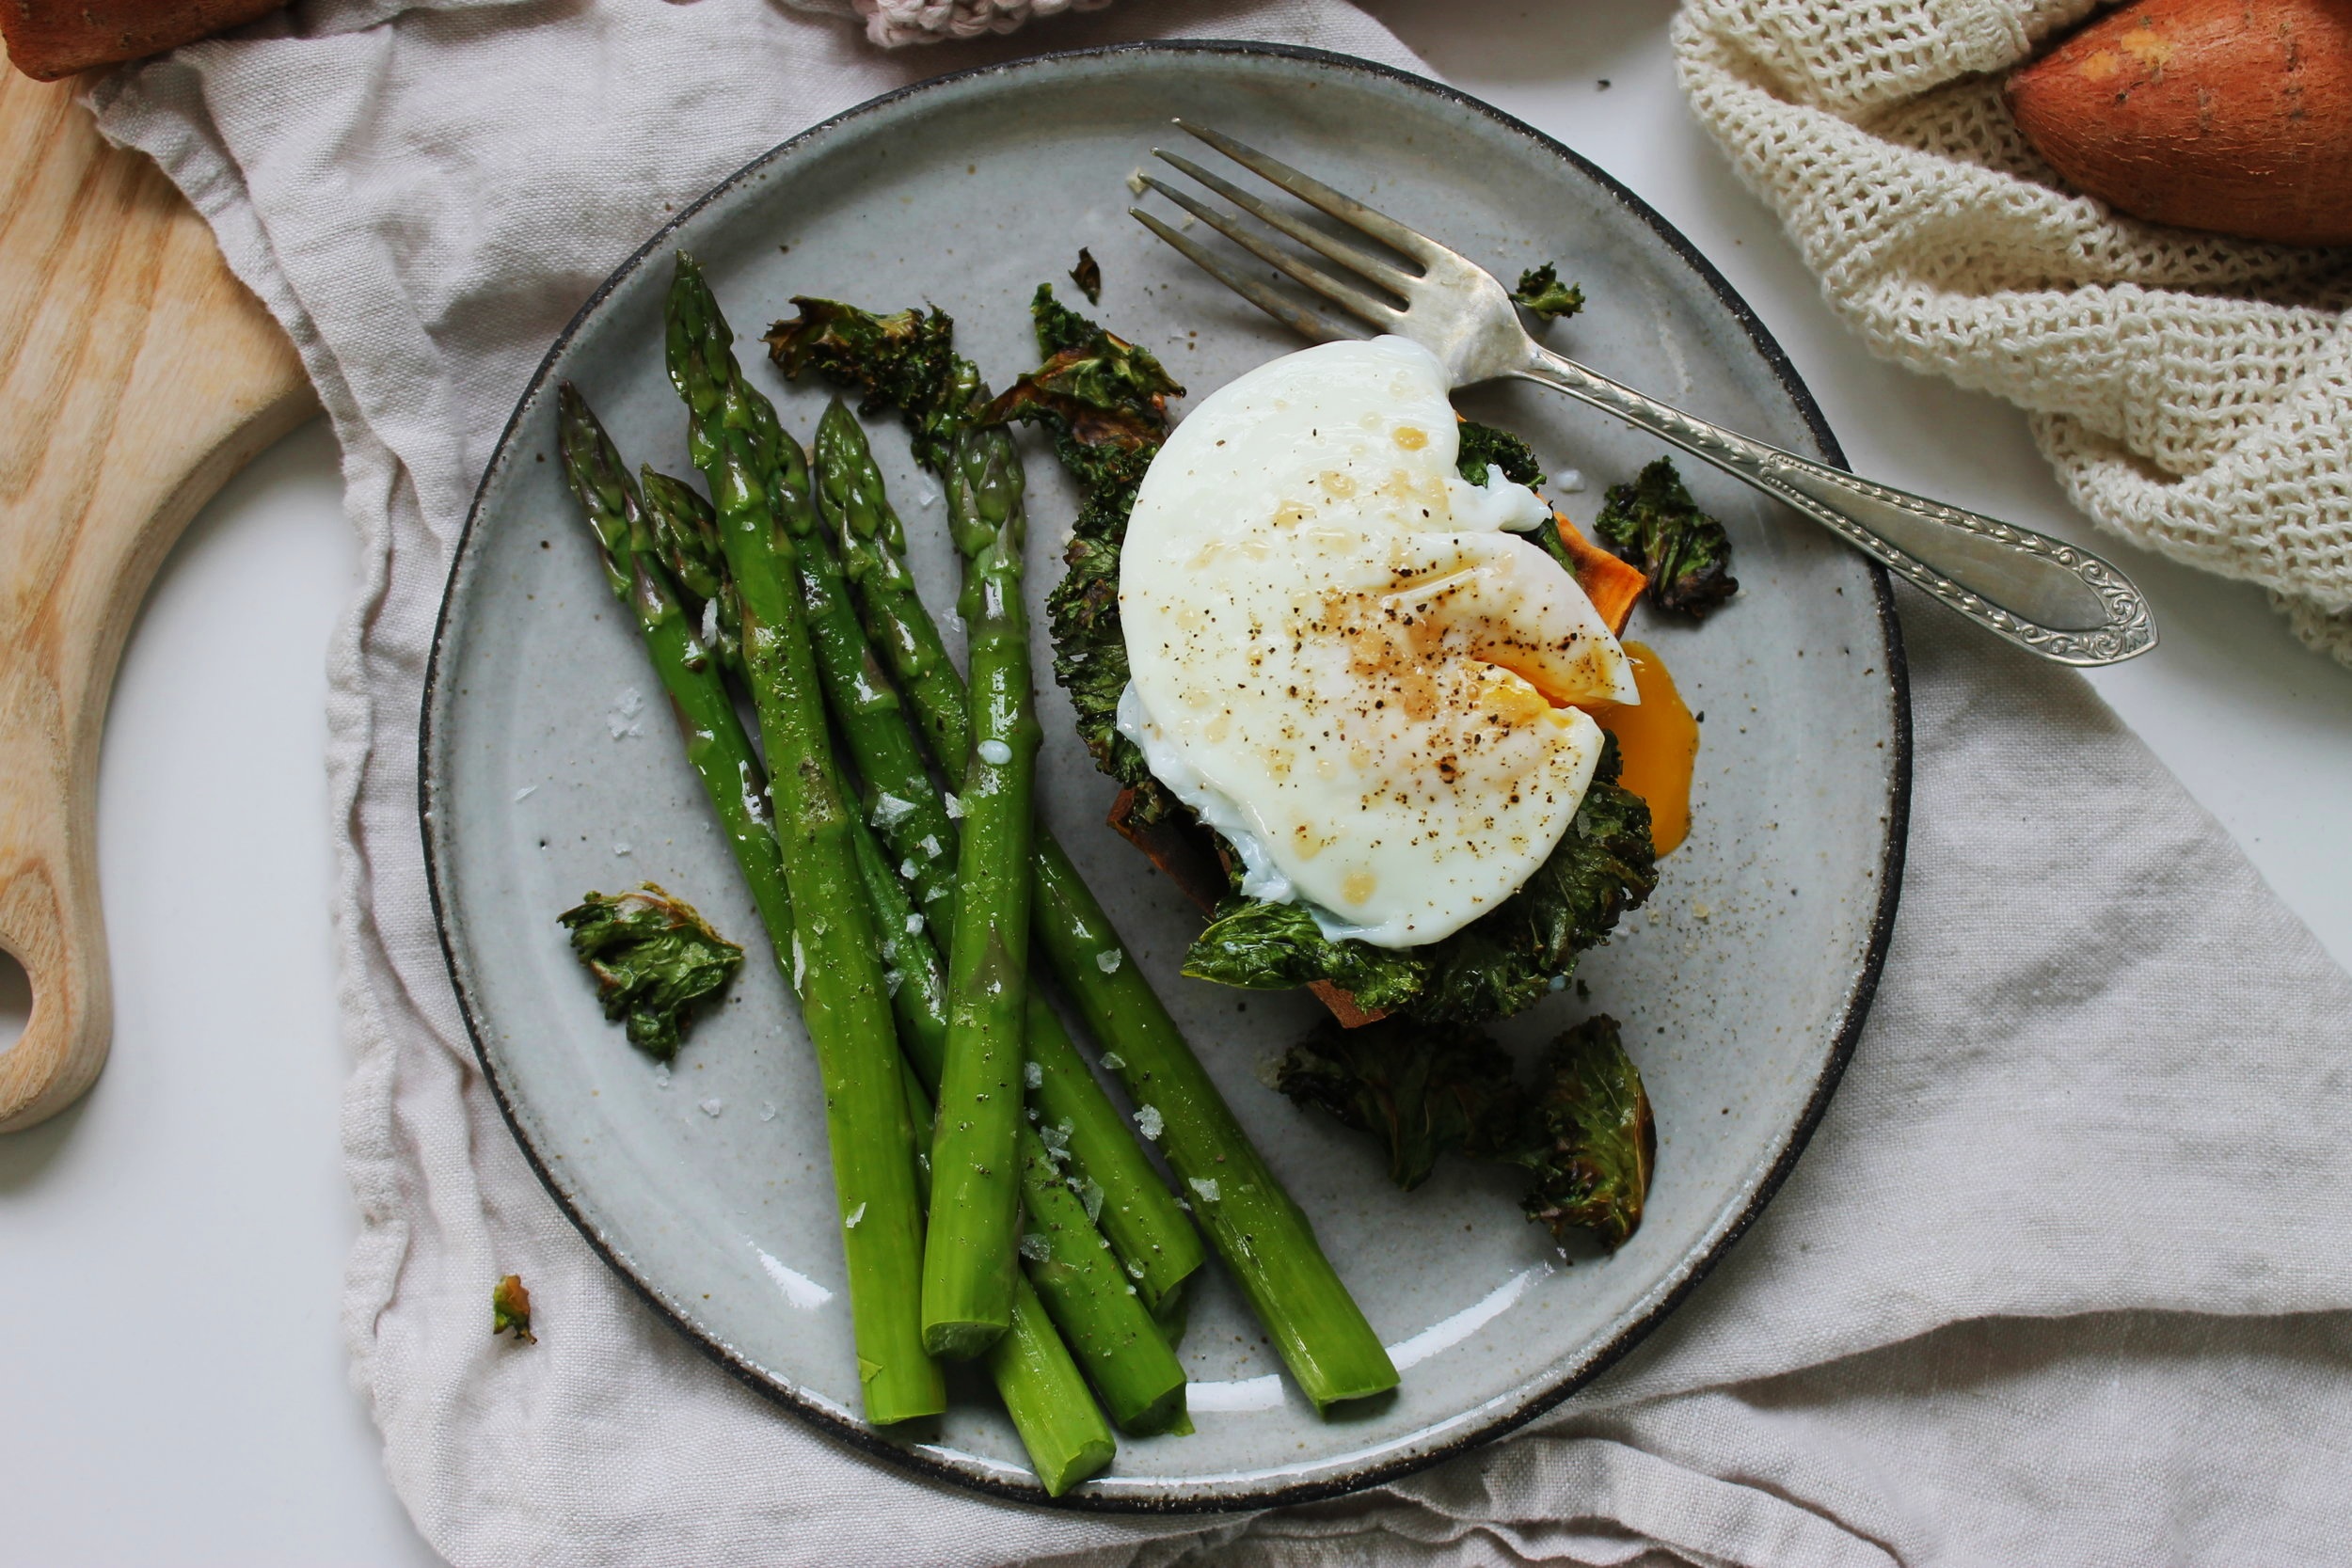 Sweet potato stacks with crispy kale and poached eggs | Beloved Kitchen